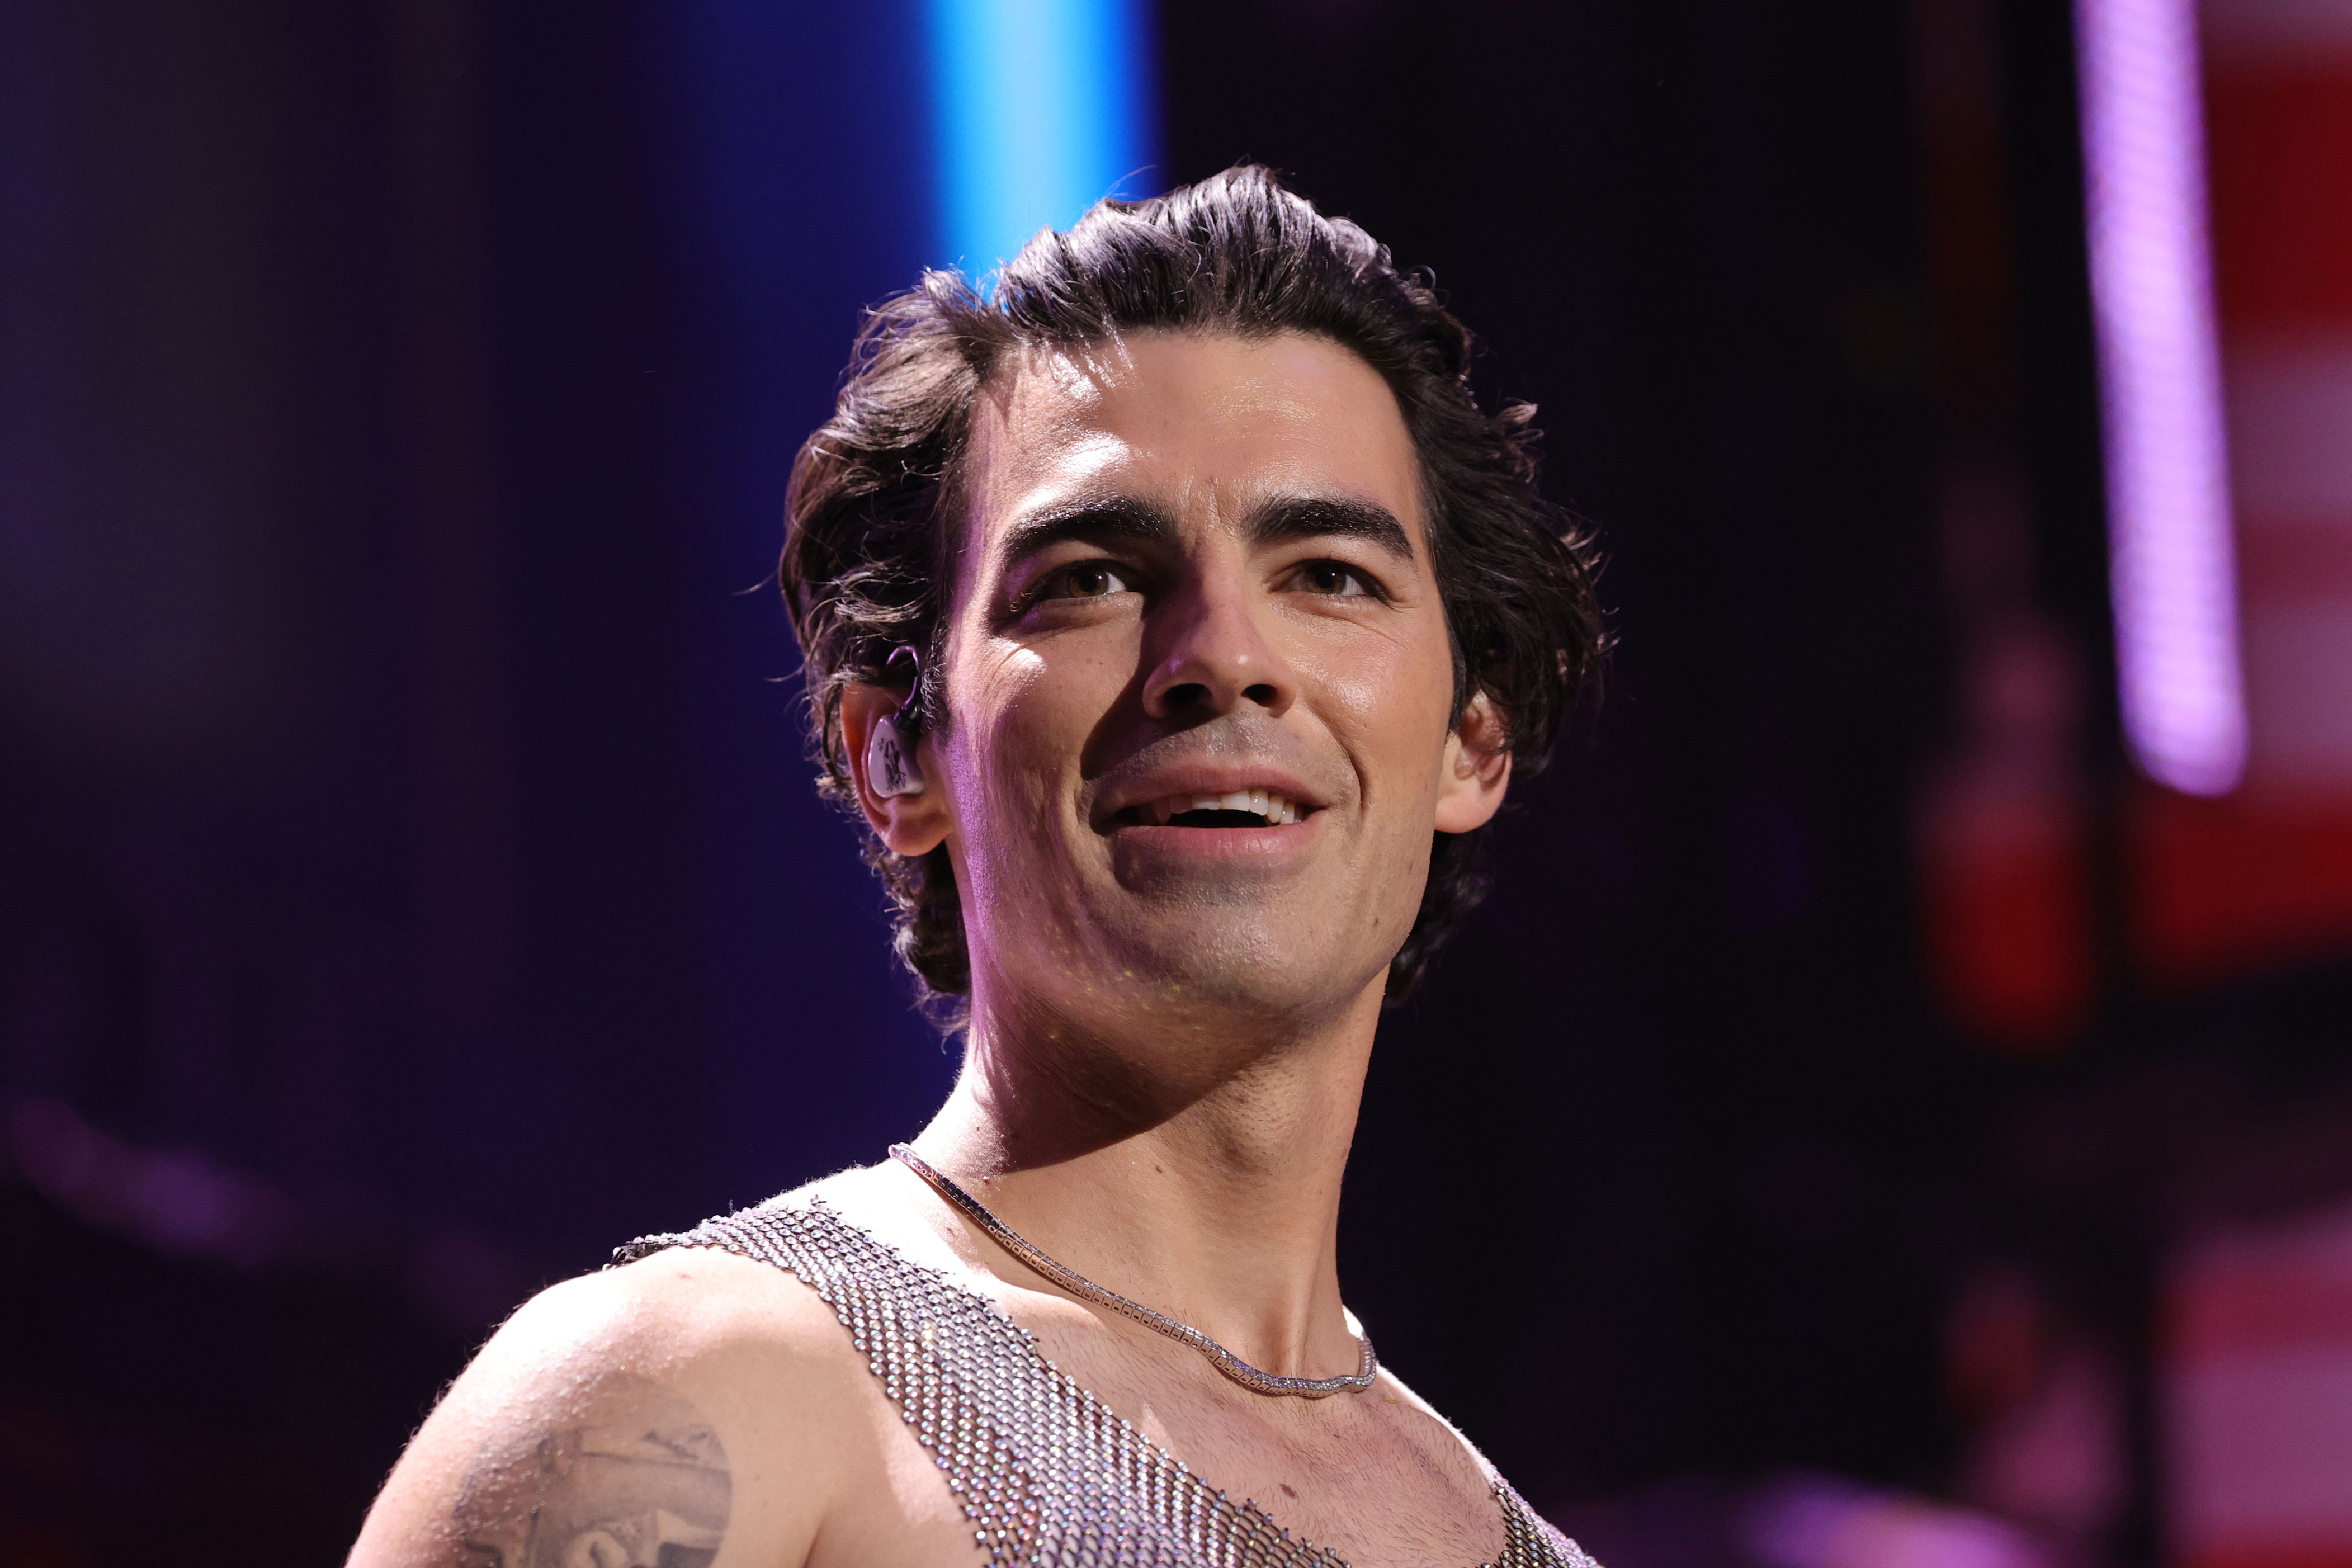 <p>Music star <a href="https://www.wonderwall.com/celebrity/profiles/overview/joe-jonas-1225.article">Joe Jonas</a> might not have gone under the knife, but he <em>is</em> a fan of injectables. In August 2022 at 33, he partnered with the Botox alternative Xeomin, a double-filtered more purified version of the botulinum toxin that's used to smooth wrinkles, frown lines and crow's feet. The Jonas Brothers singer told <a href="https://www.allure.com/story/joe-jonas-injectables-experience">Allure</a> that he "didn't feel like I was a different person [by using it]" and that it "gave me that confidence that I think we all want to feel as we get older. There's this kind of stigma around guys talking about skincare and how we feel and, and the products we use. I felt like it was a good fit." He said he tried it "when I noticed I was starting to see more frown lines," though didn't share how old he was when that began. "This was something that gave me that confidence boost that I was looking for," he explained. Keep reading to see the results...</p>